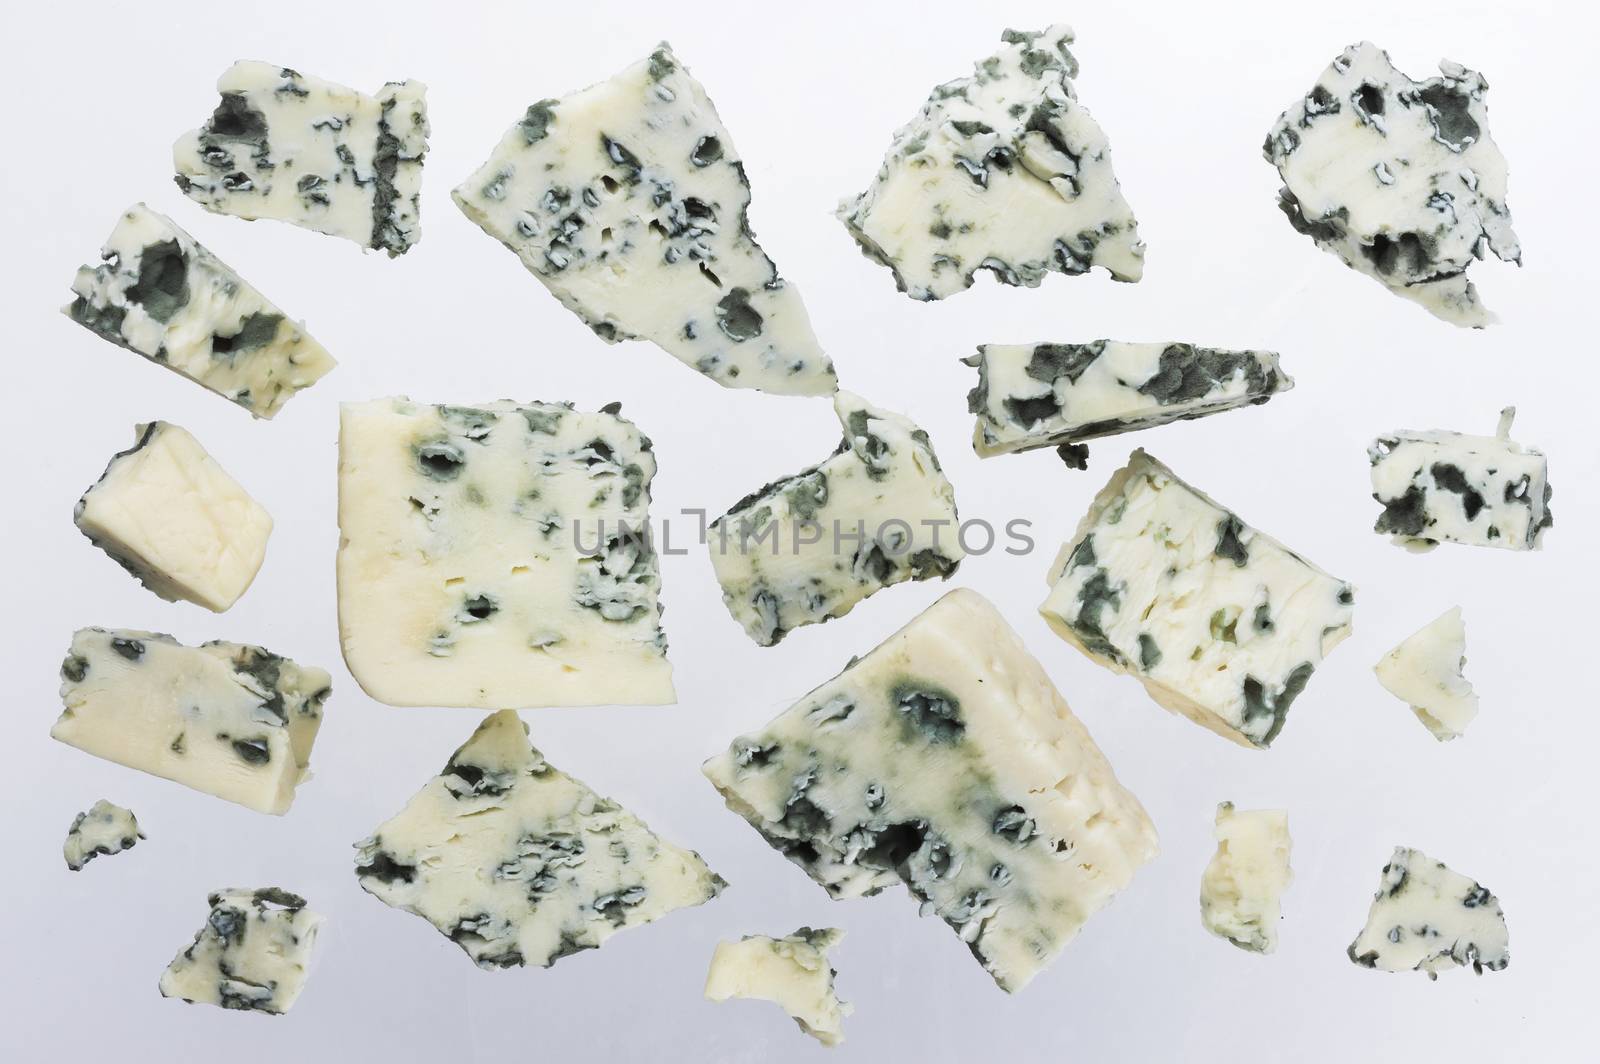 Danish blue cheese isolated on white background with clipping path. Collection